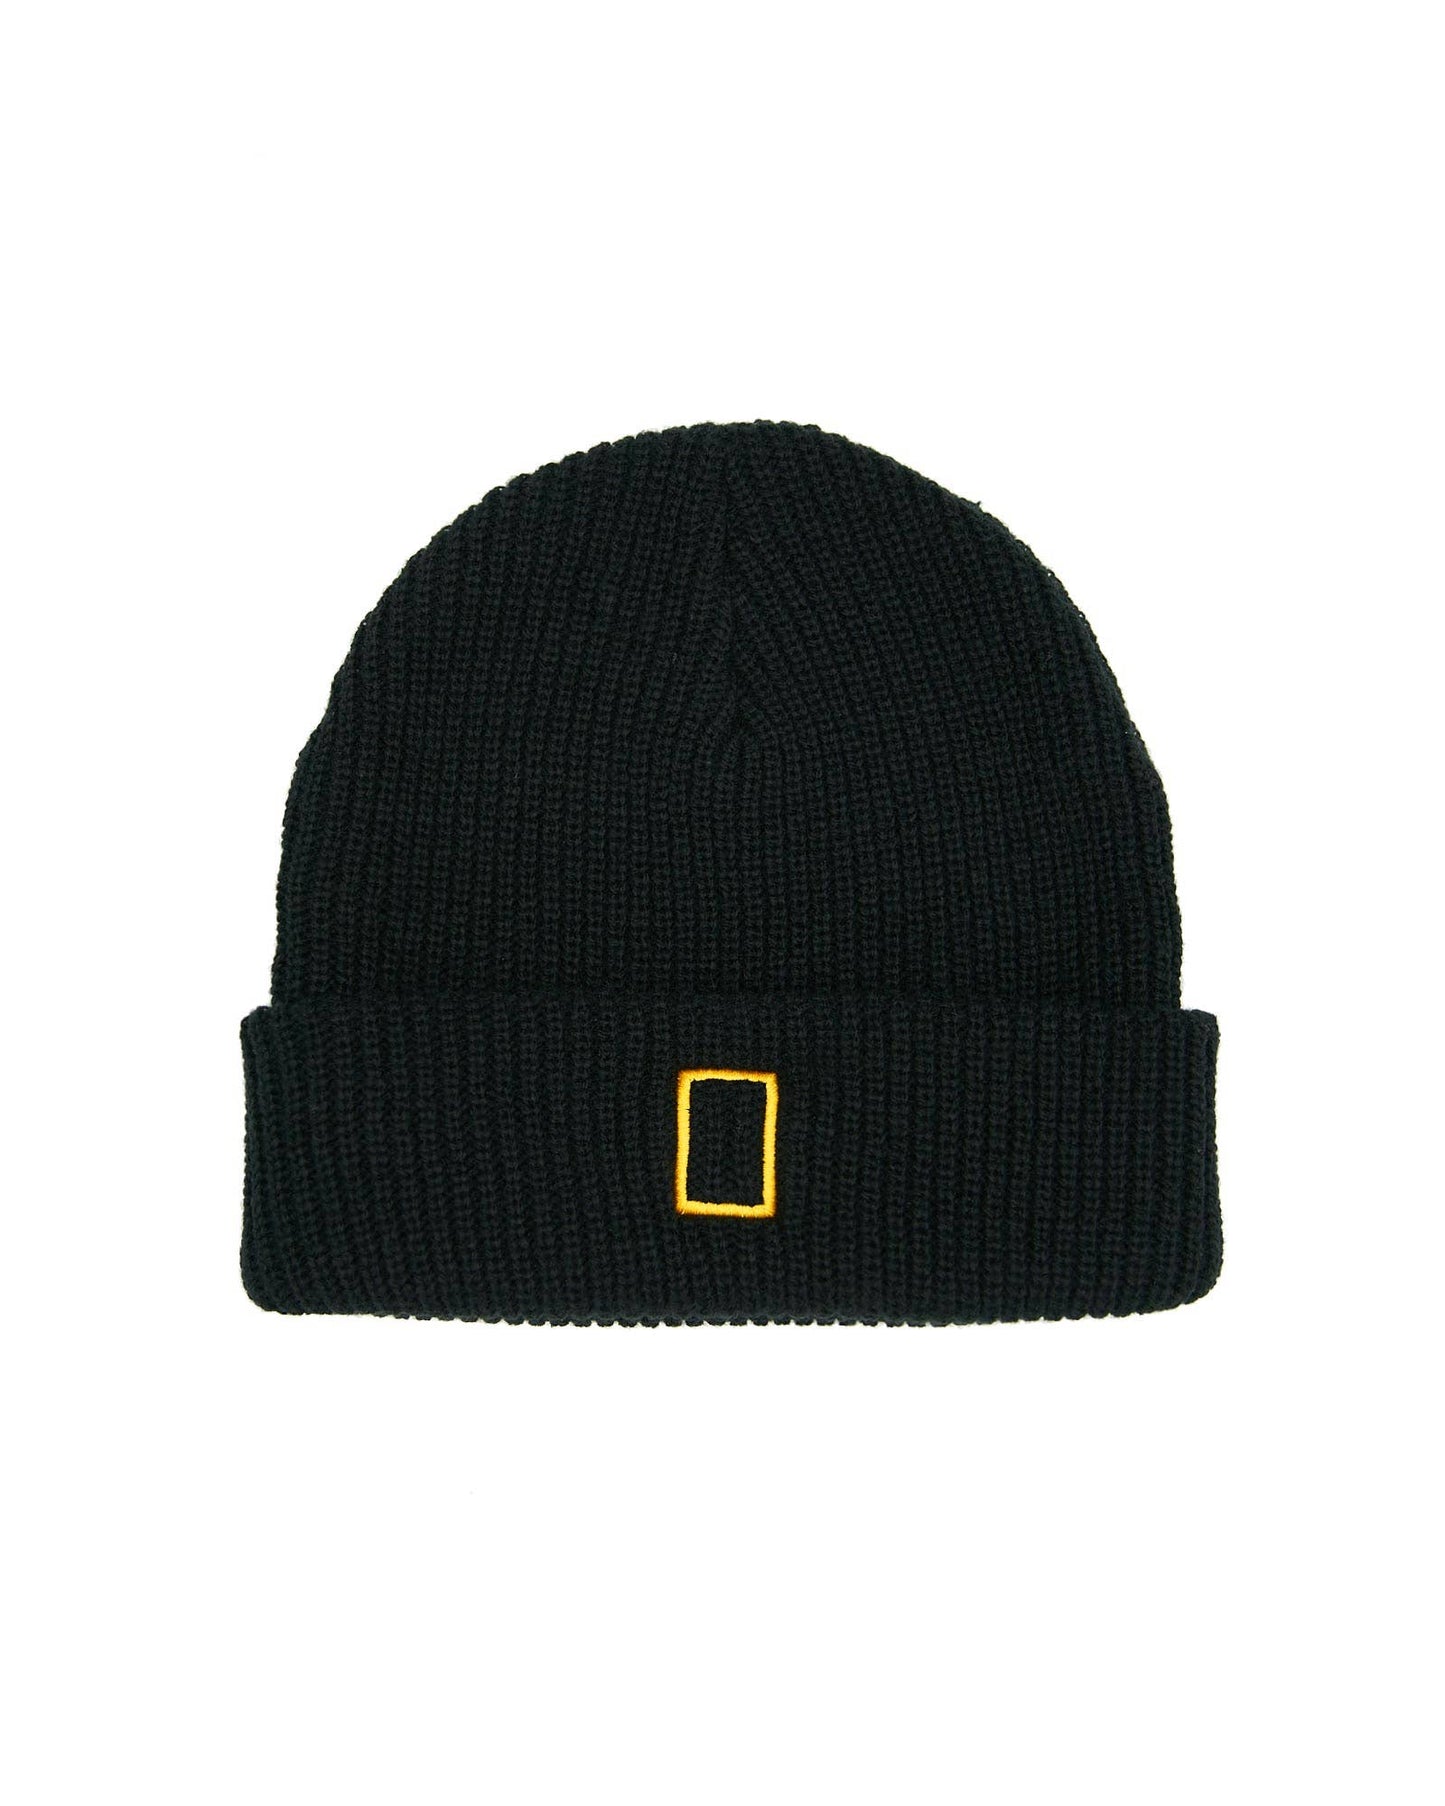 Black National Geographic beanie by Parks Project